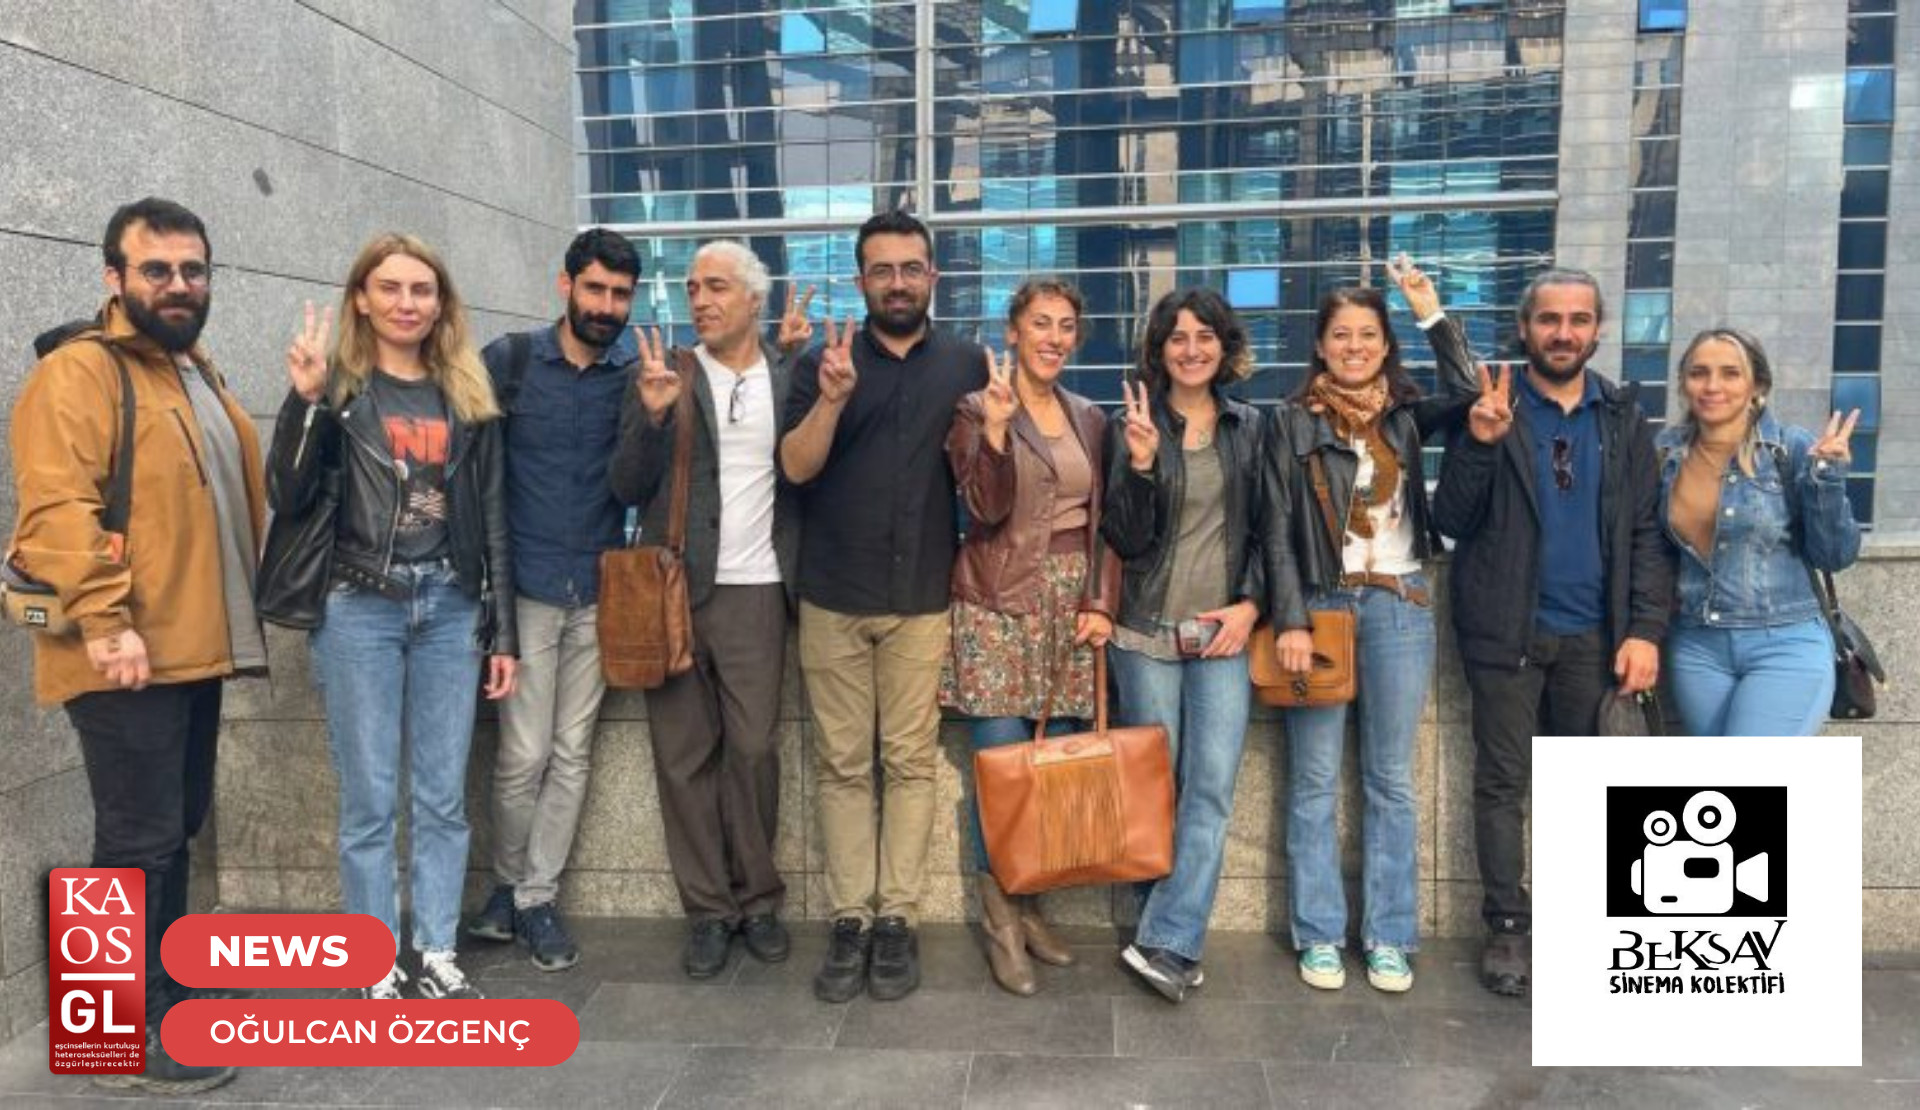 “Considering to postpone the case instead of rendering a decision of acquittal promptly, constitutes a breach of the right to a fair trial” | Kaos GL - News Portal for LGBTI+ News